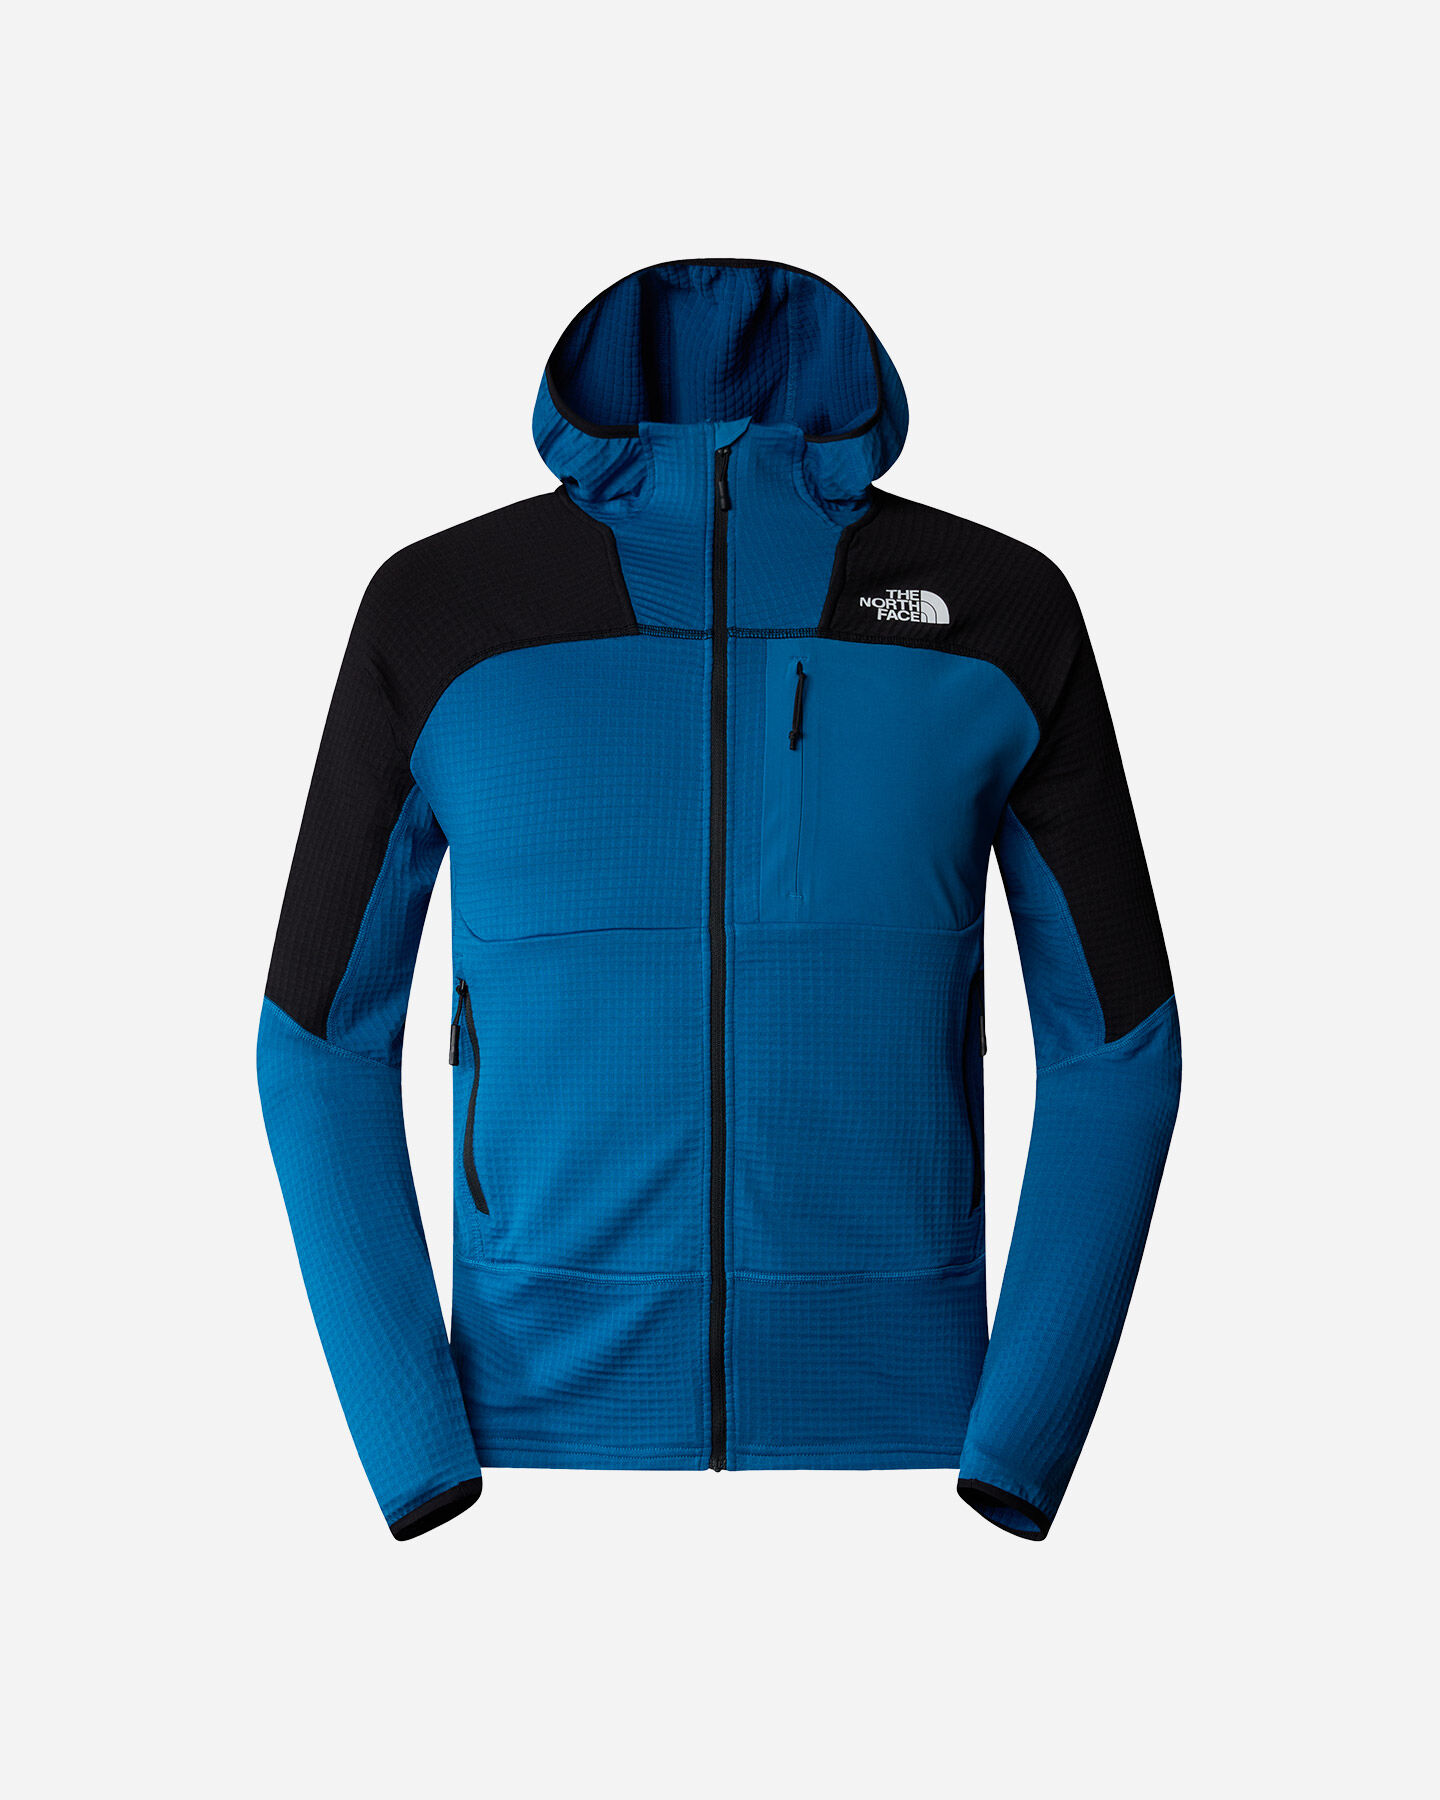  Pile THE NORTH FACE STORMGAP POWER GRID M S5650931|WIG|S scatto 0